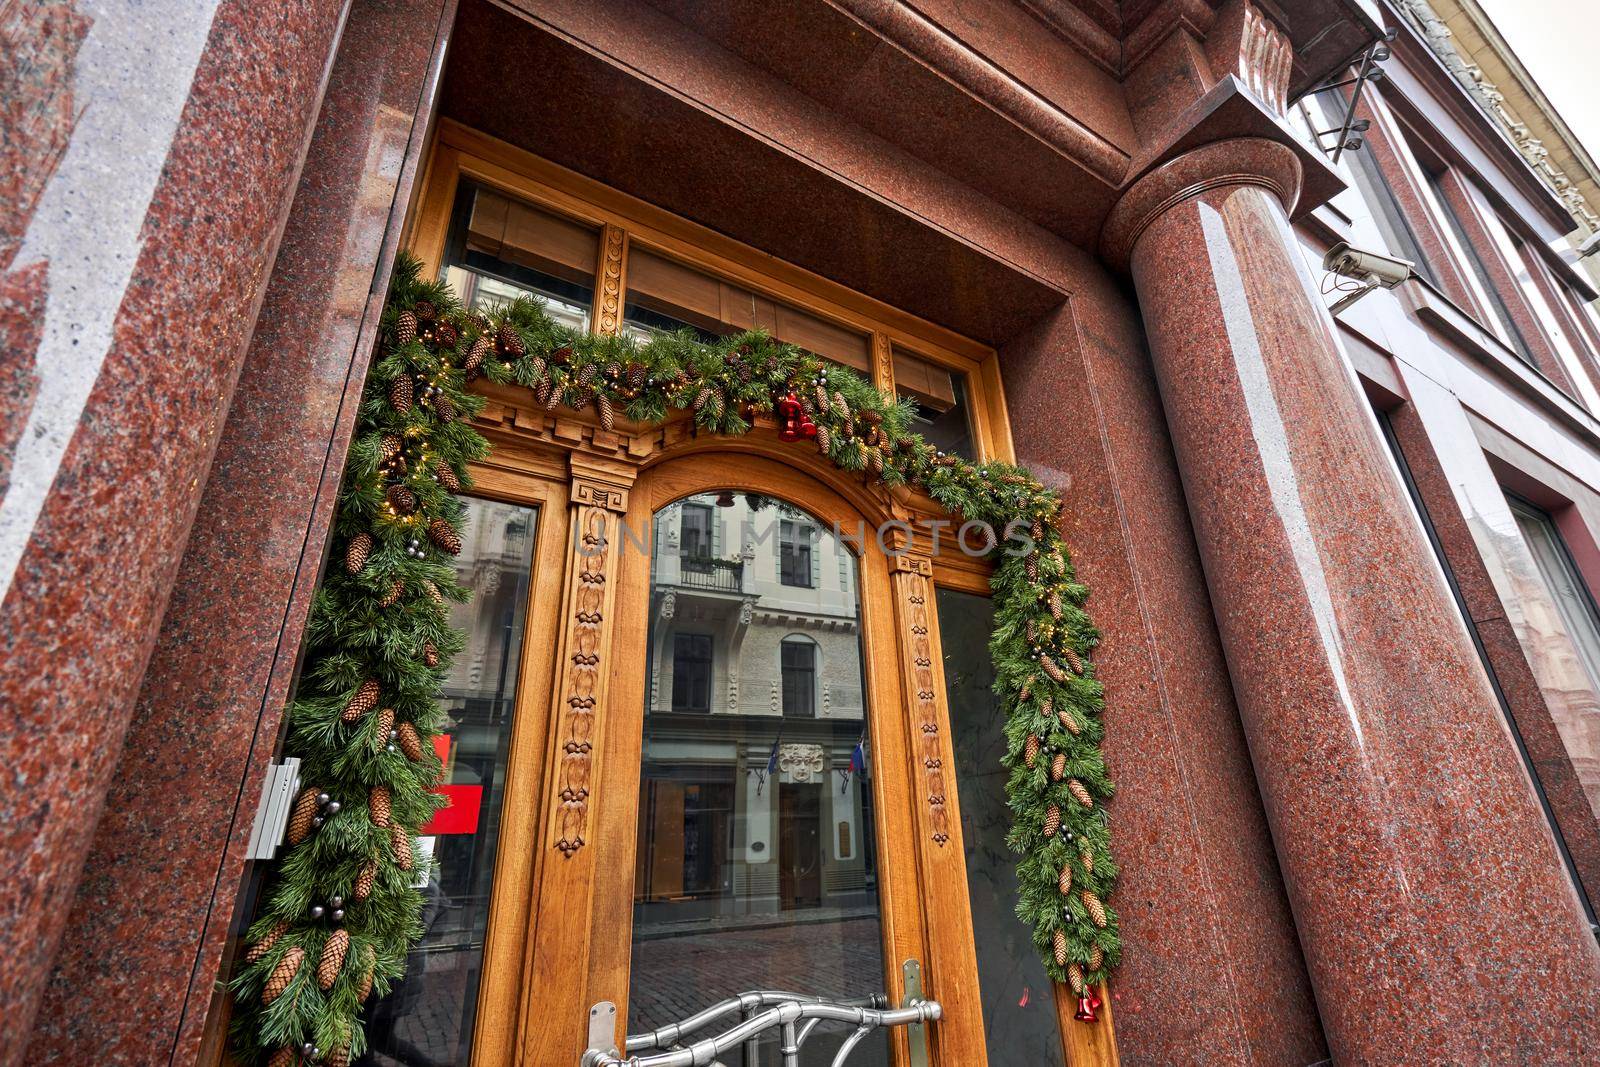 Christmas morning. House with a decorated door with a Christmas wreath and tree branches. Street european city